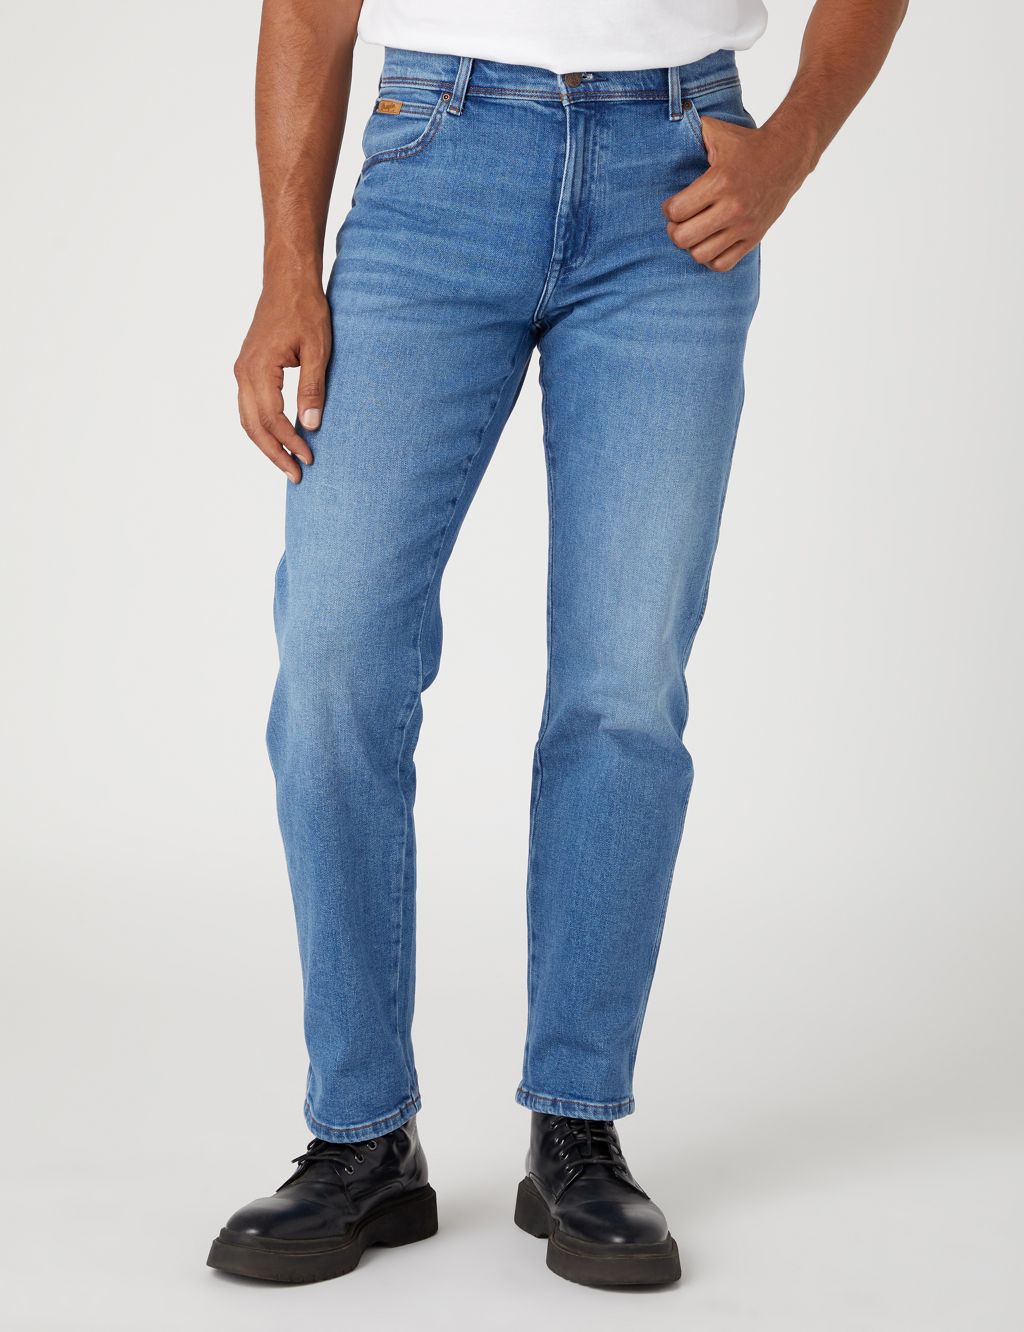 Texas Authentic Straight Fit 5 Pocket Jeans image 1